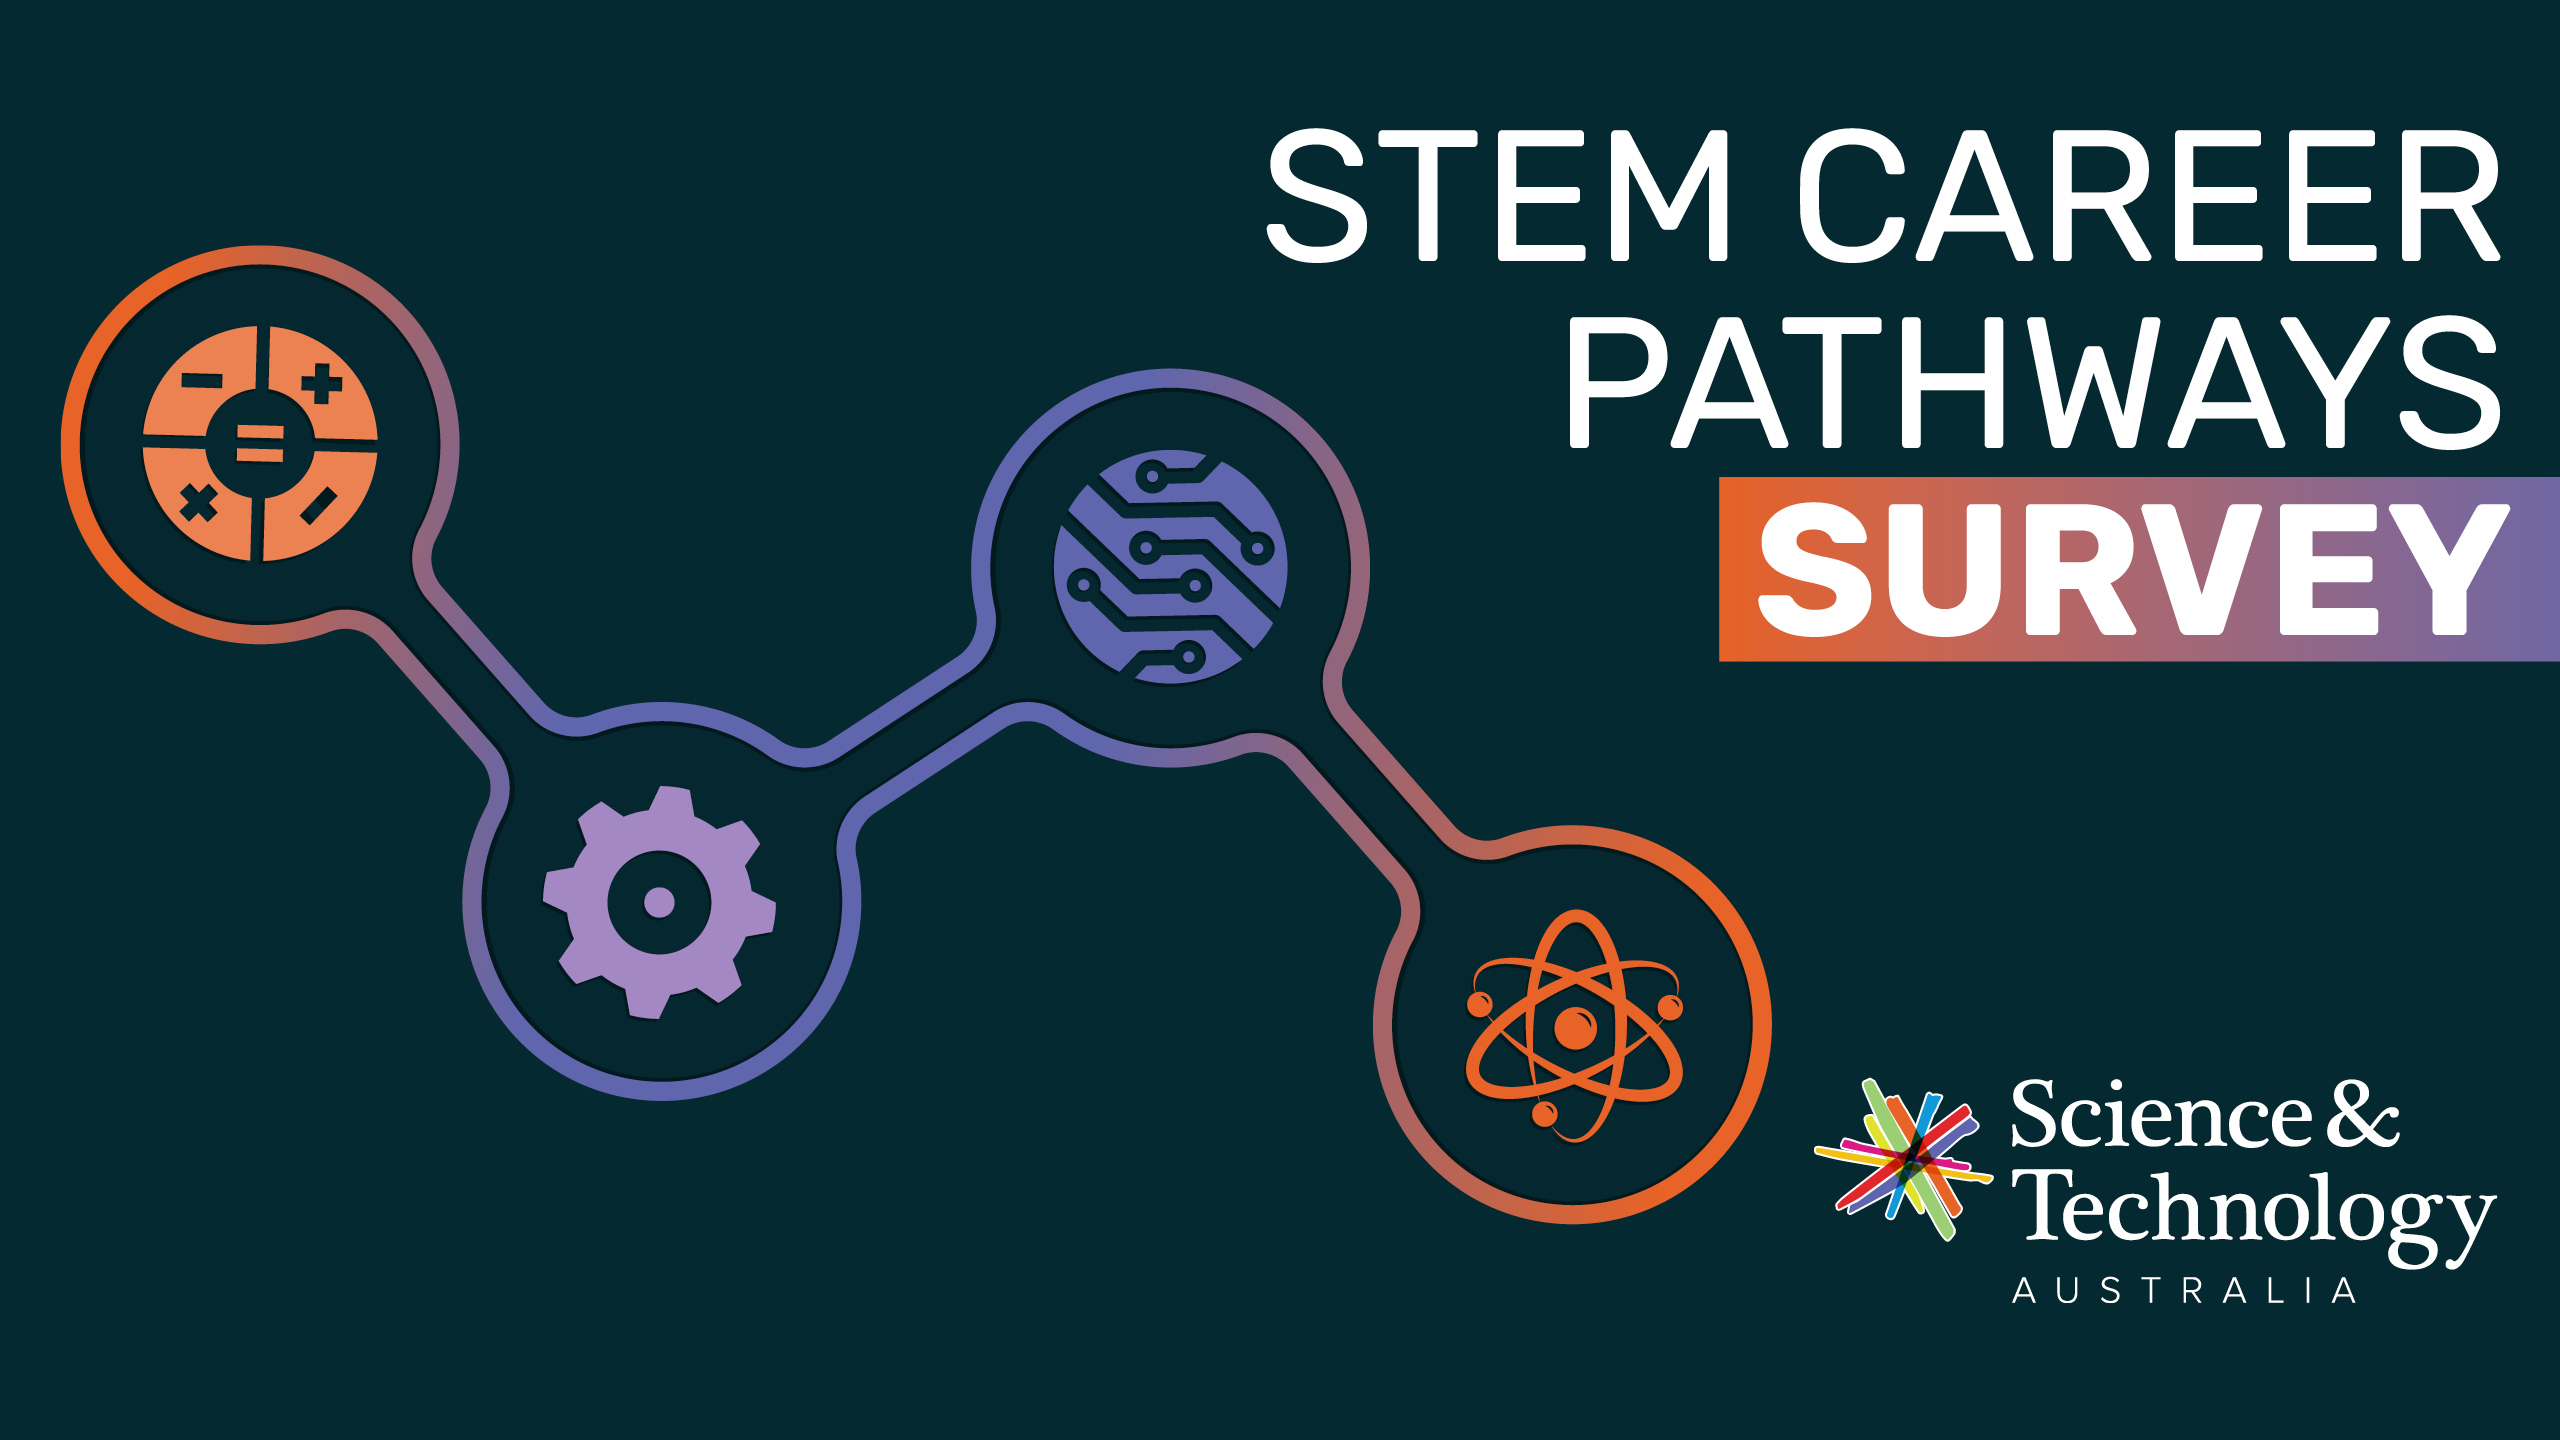 Icons of a cog, calculator, circuit board and atomon the left of the text "STEM CAREER PATHWAY SURVEY" that appears on the right with the STA logo.